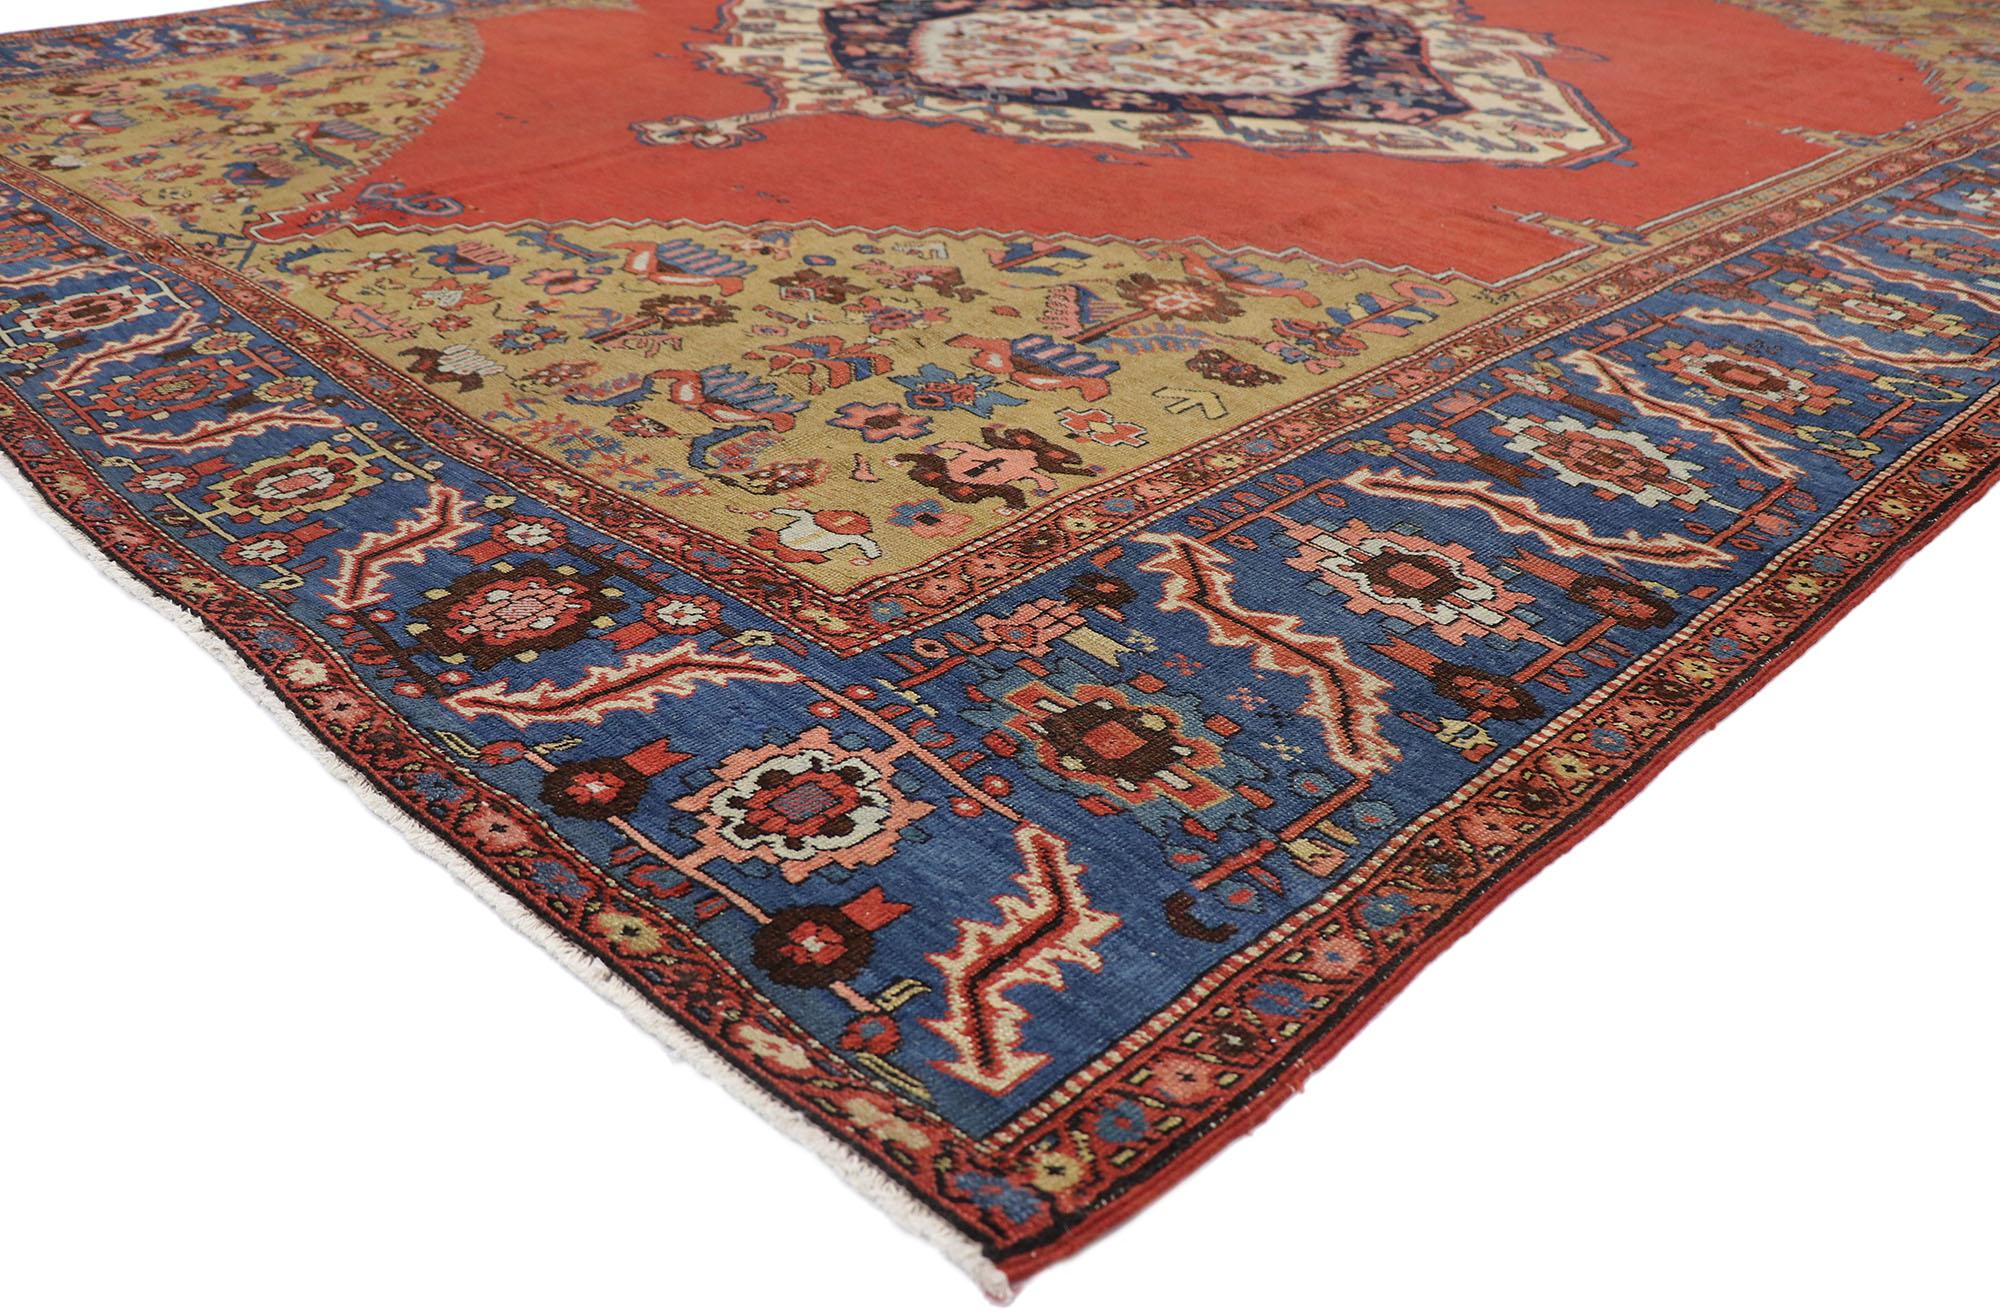 78085 antique Persian Bakshaish rug 11'04 x 15'00. Imbued with austere elegance, earthy hues and rustic sensibility, this hand-knotted wool vintage Persian Bakshaish rug will take on a curated lived-in look that feels timeless while imparting a